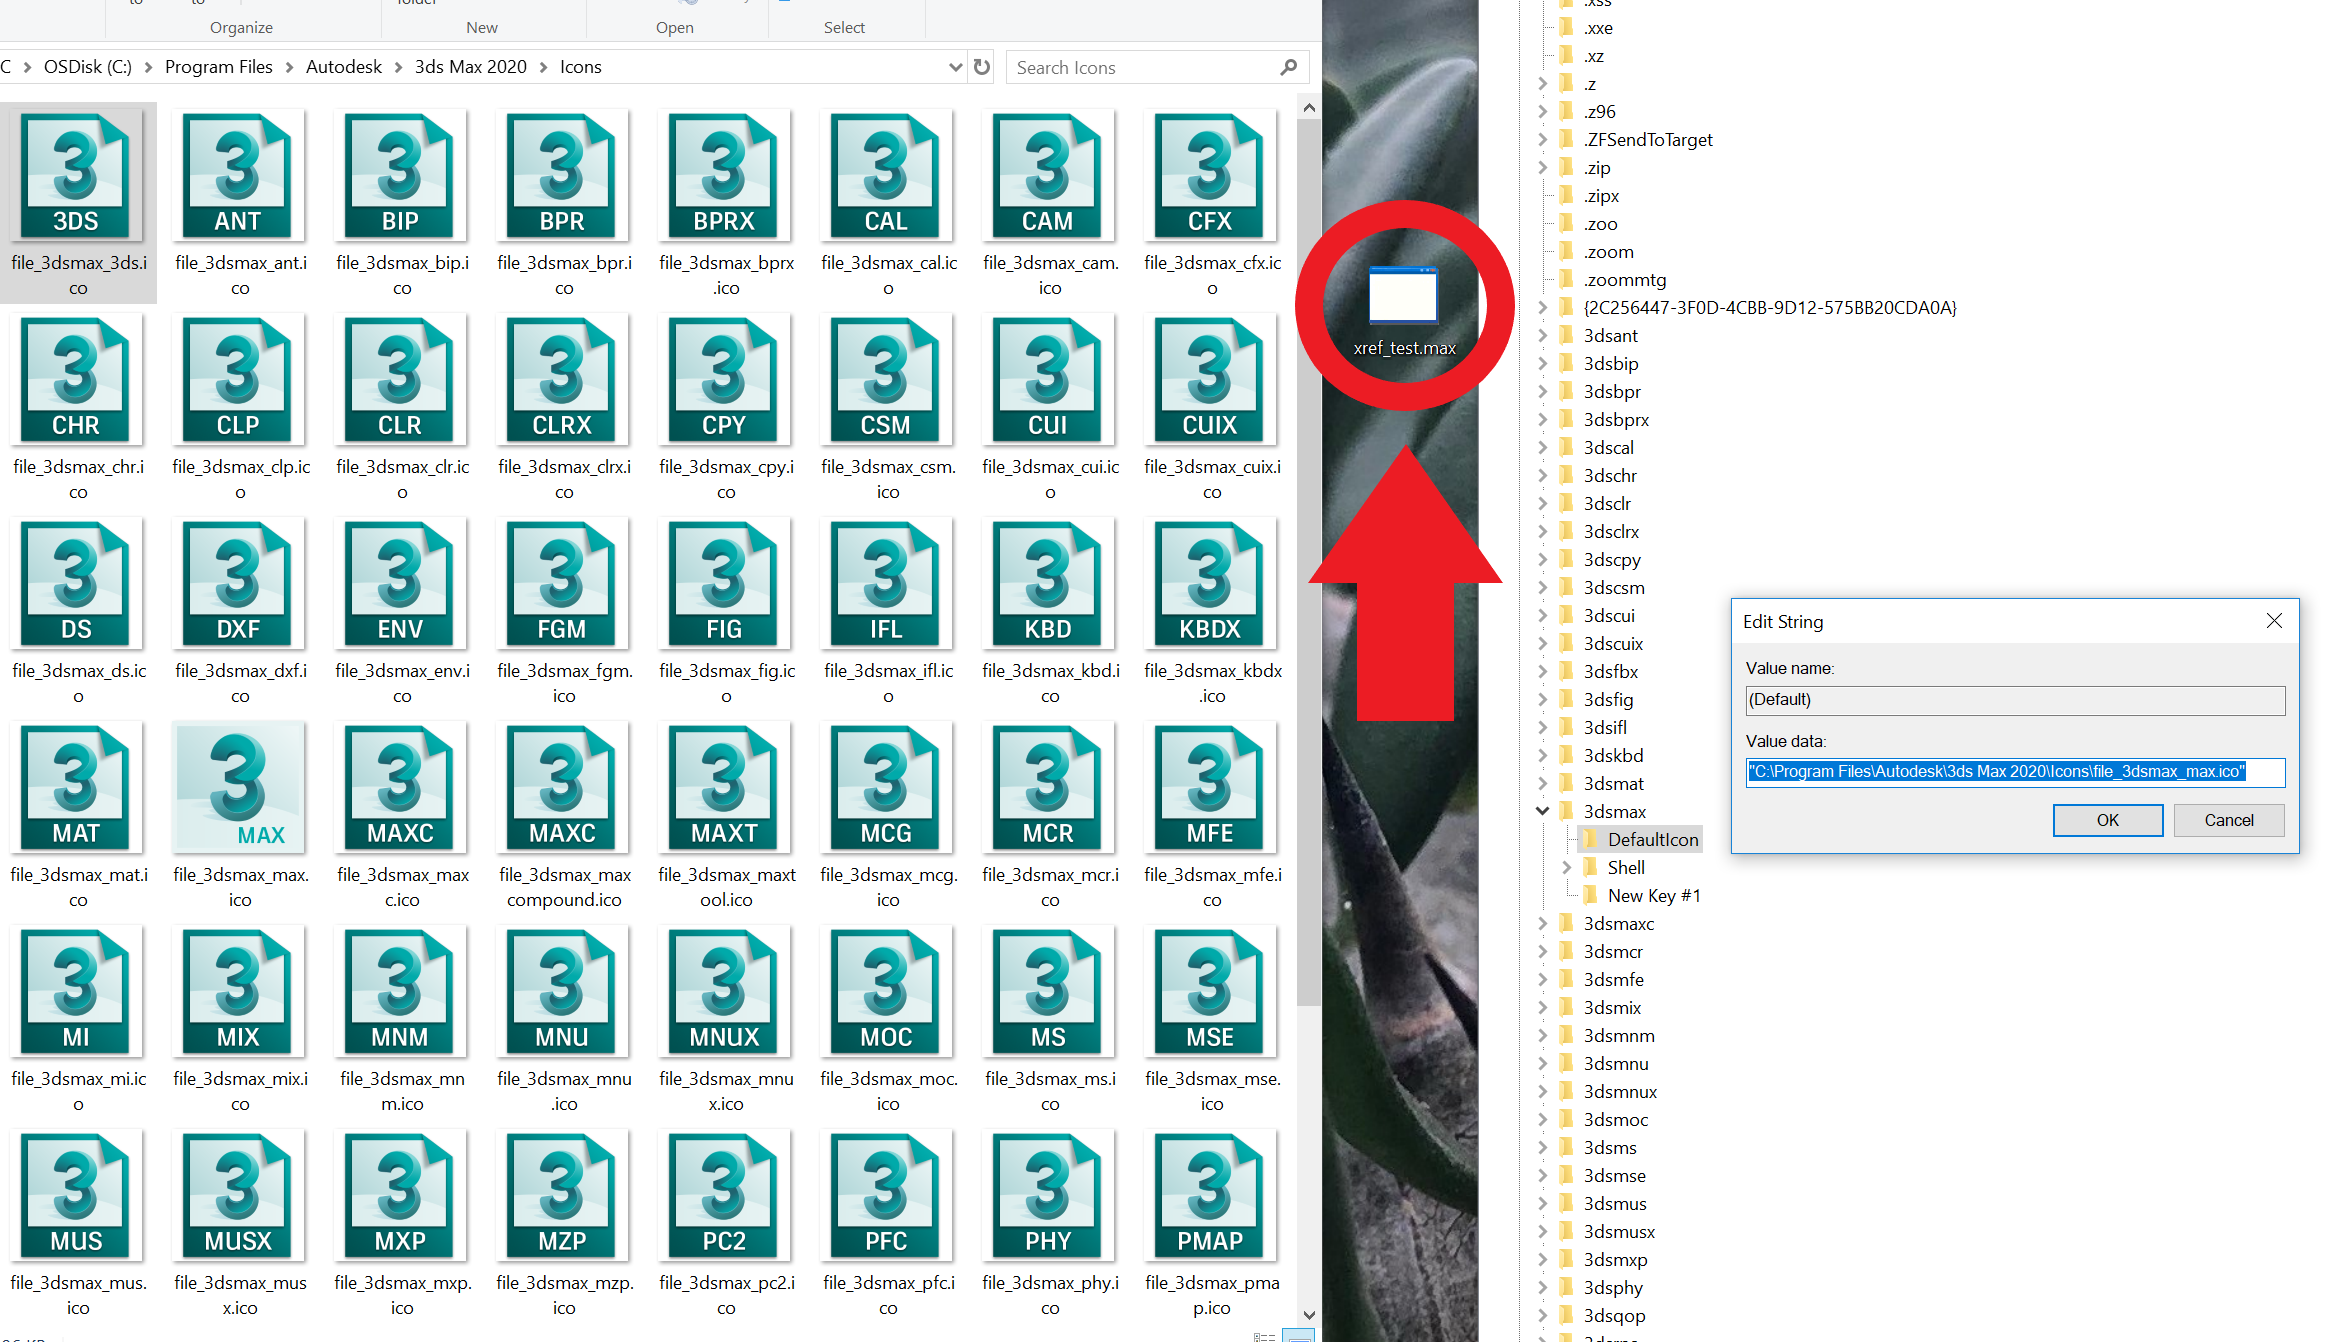 Solved: 3ds max 2020 icon problem - Autodesk Community - 3ds Max